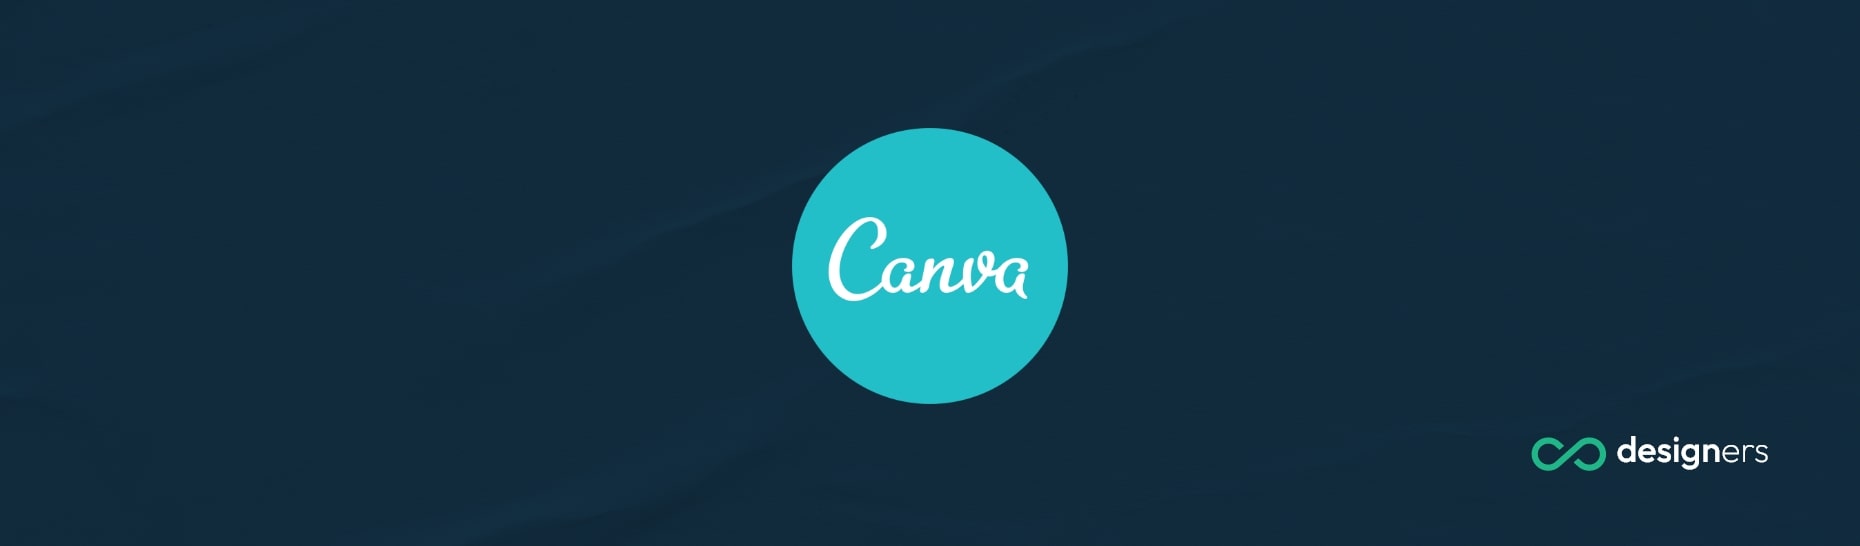 Is Canva Vector or Raster?